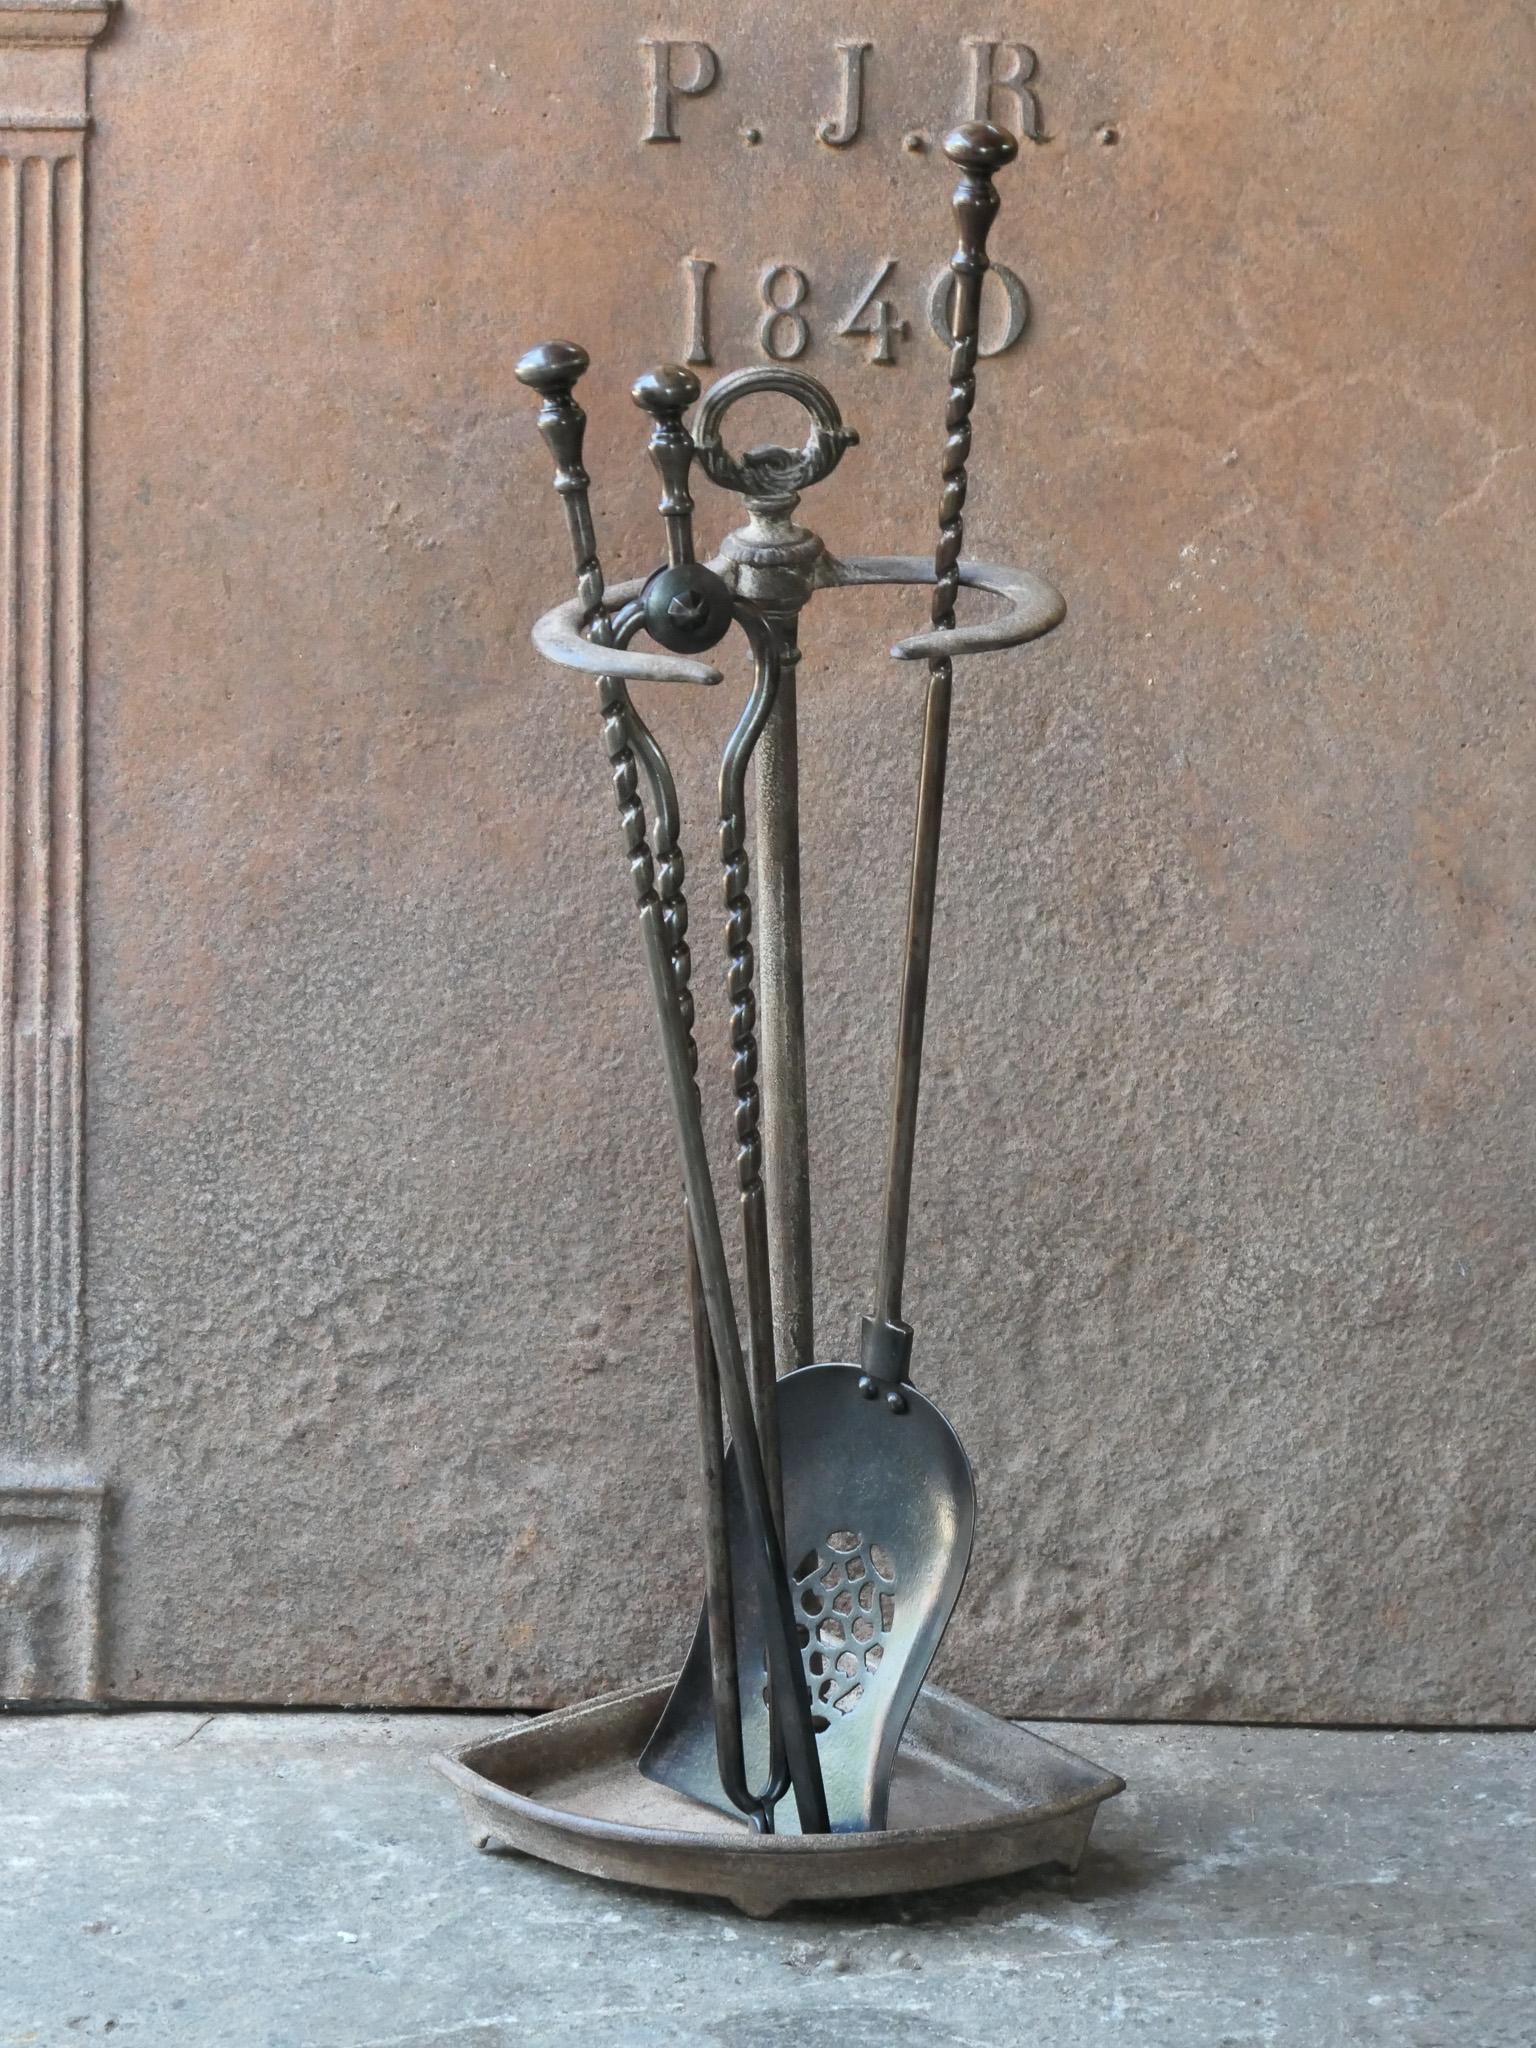 19th century English Victorian period fireplace toolset. The tools are made of wrought iron, while the stand is made of cast iron. The toolset consists of tongs, poker, shovel and stand. The condition is good.








.